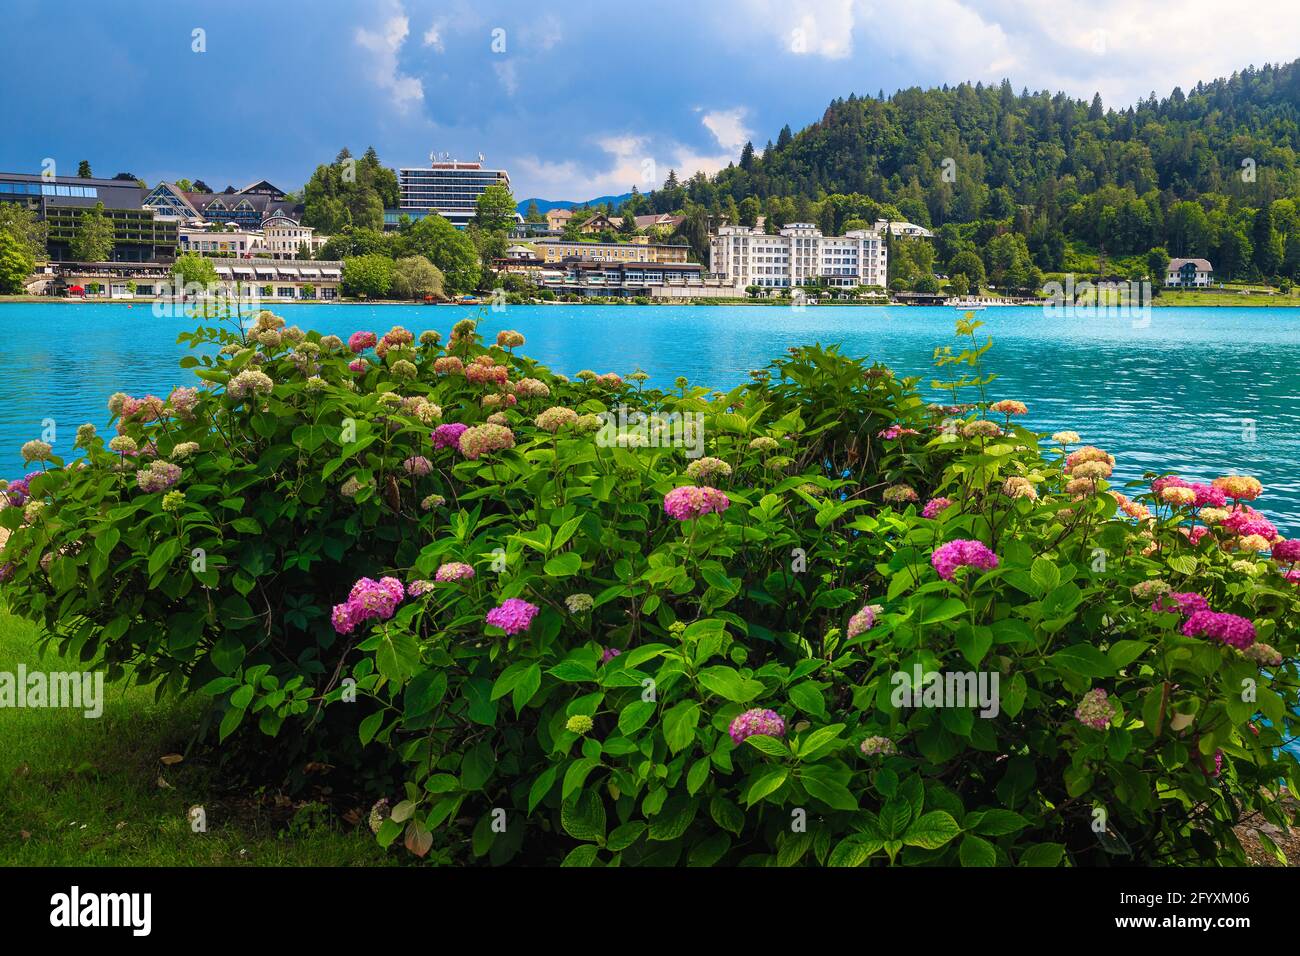 Hydrangea flower bushes on the lake shore. Hotels and restaurants on the waterfront, lake Bled, Slovenia, Europe Stock Photo